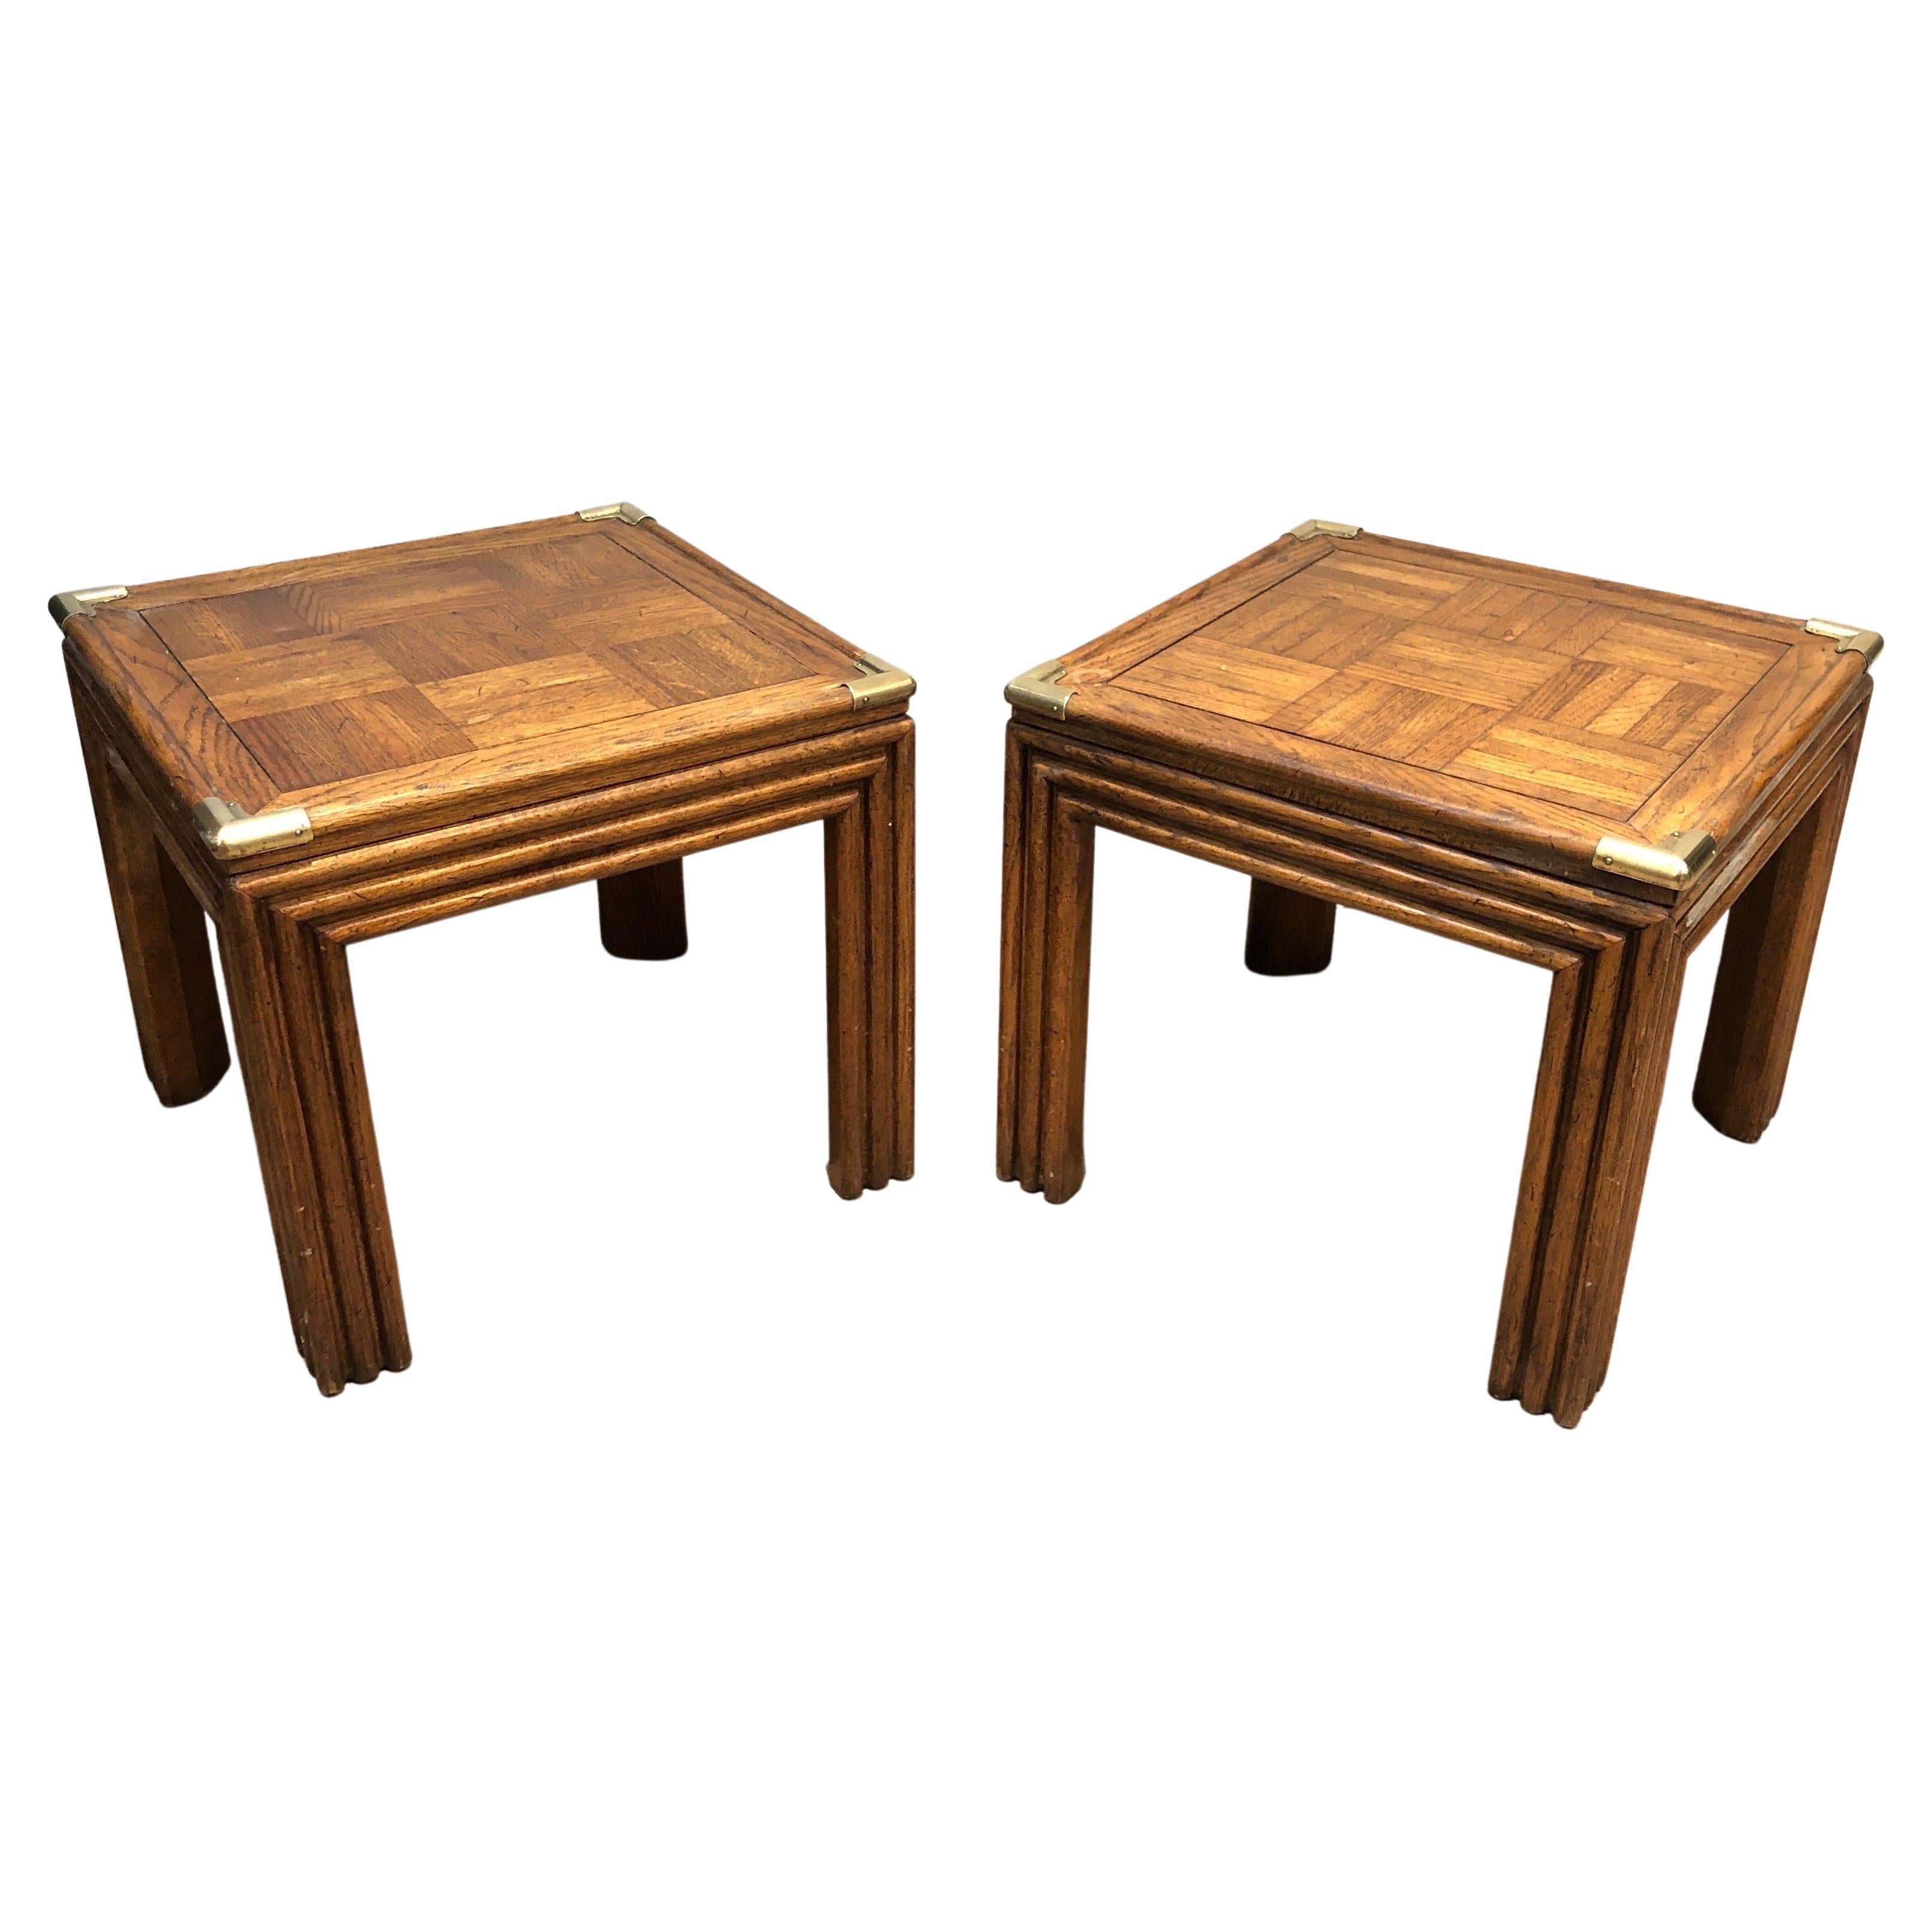 Pair of Wood and Brass Side Tables with Wood Marquetry Tops, French Work